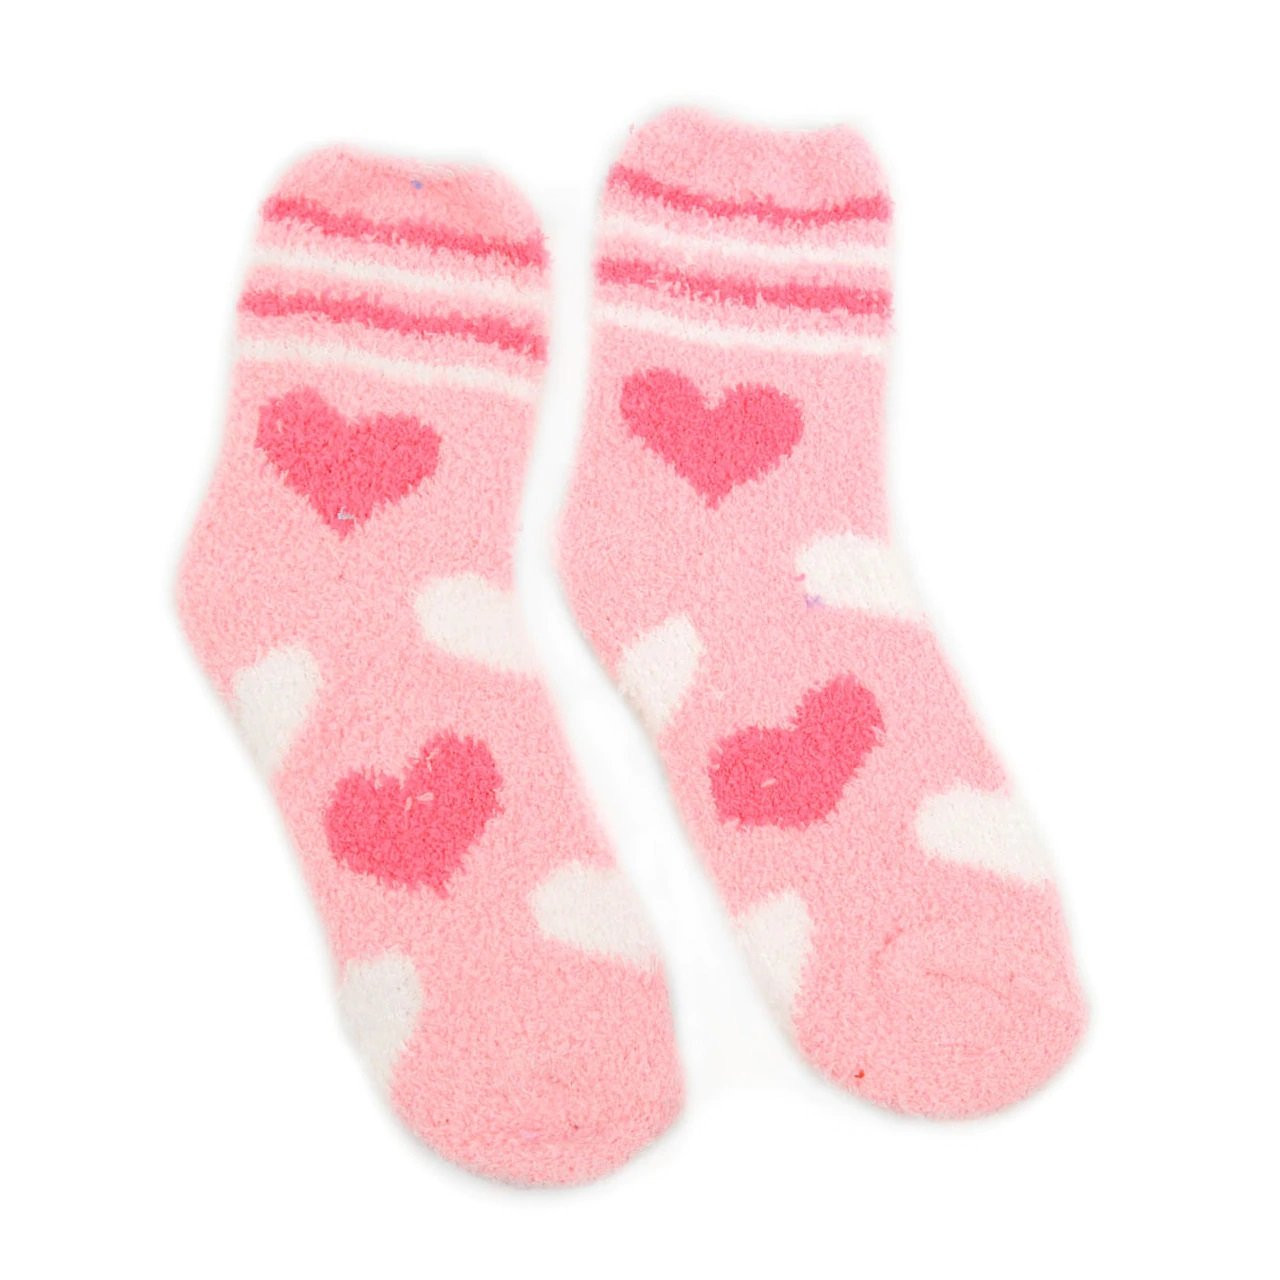 3 Pairs of Women's Valentine's Day Assorted Pack Heart Warm Fuzzy Socks ...